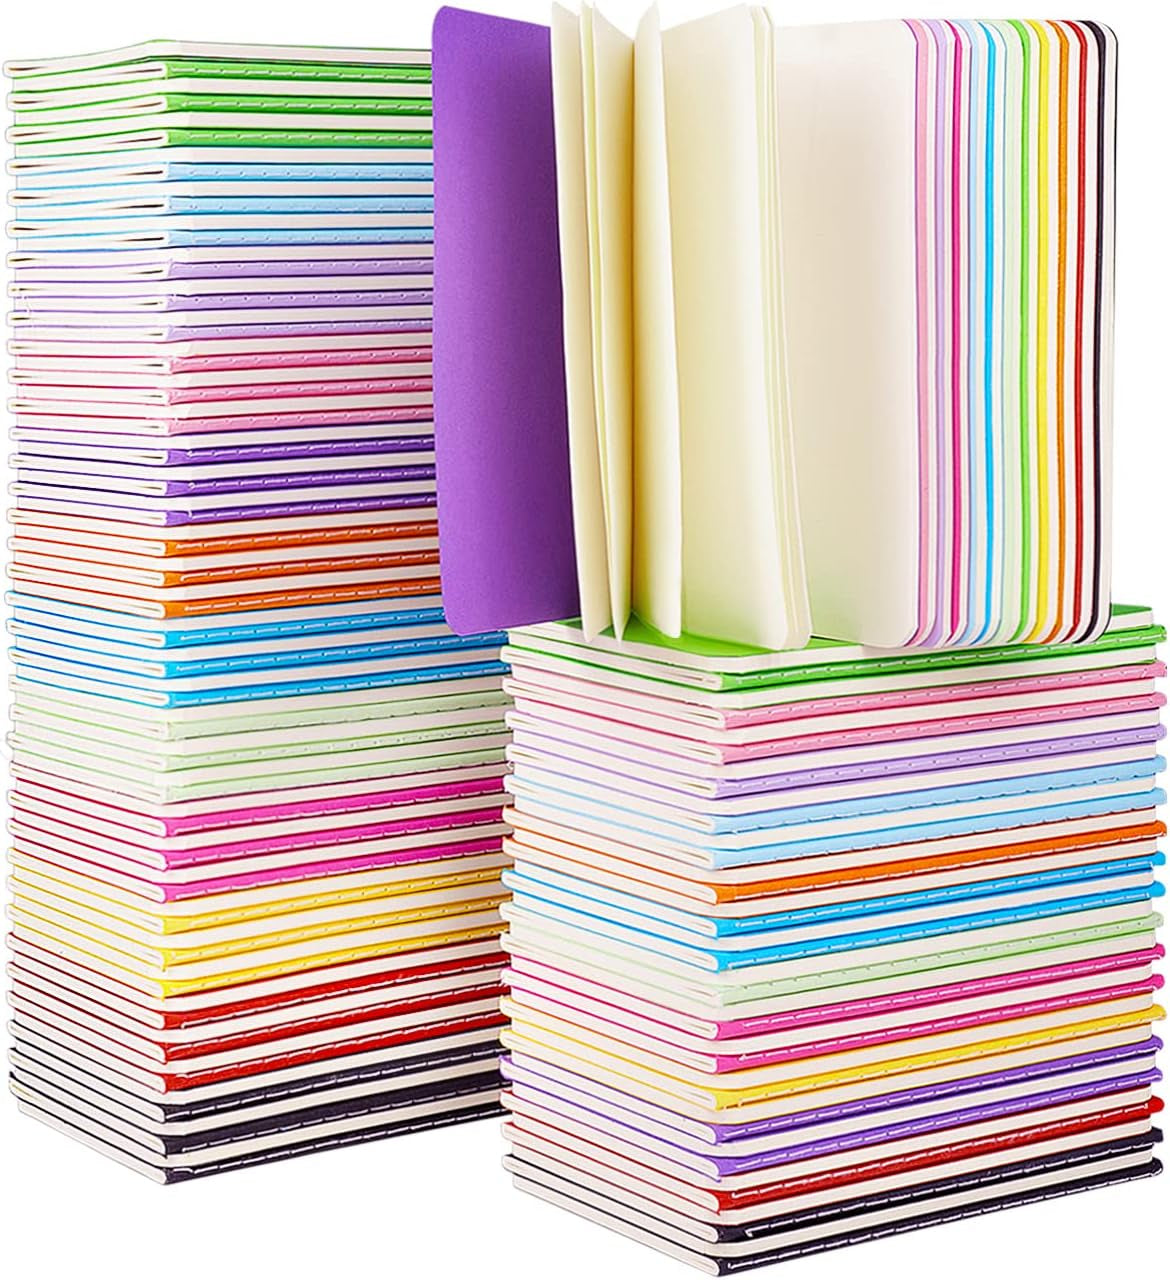 Small Lined Notepads Bulk 60 Pack Mini Journal Pocket Notebooks Set Colorful Cover Notebooks for Kids 3.5 X 5.5 Inches, 30 Sheets/60 Pages